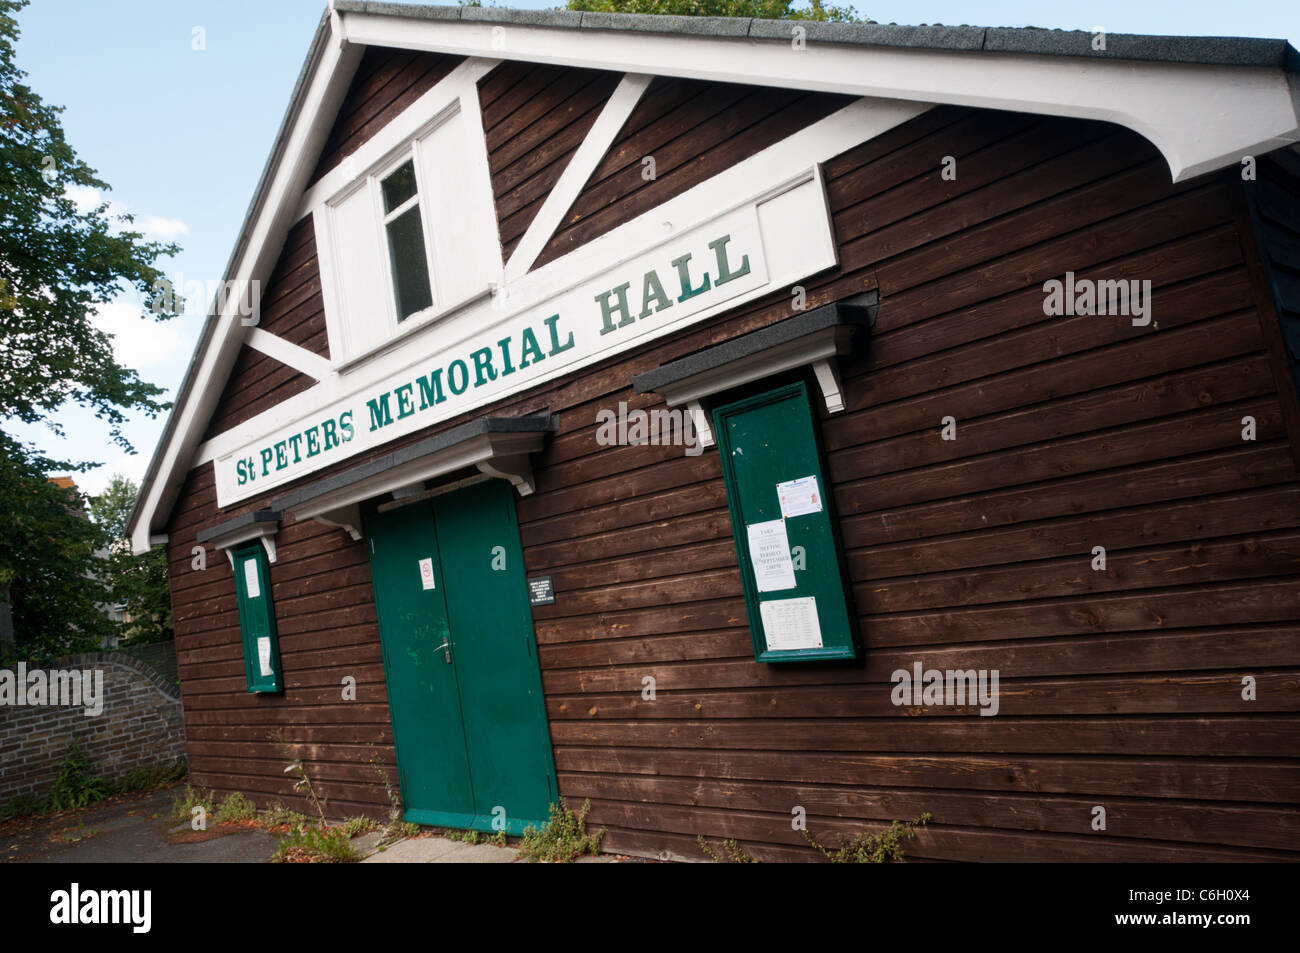 The wooden village hall of St Peter's, near Broadstairs, in Kent, England Stock Photo